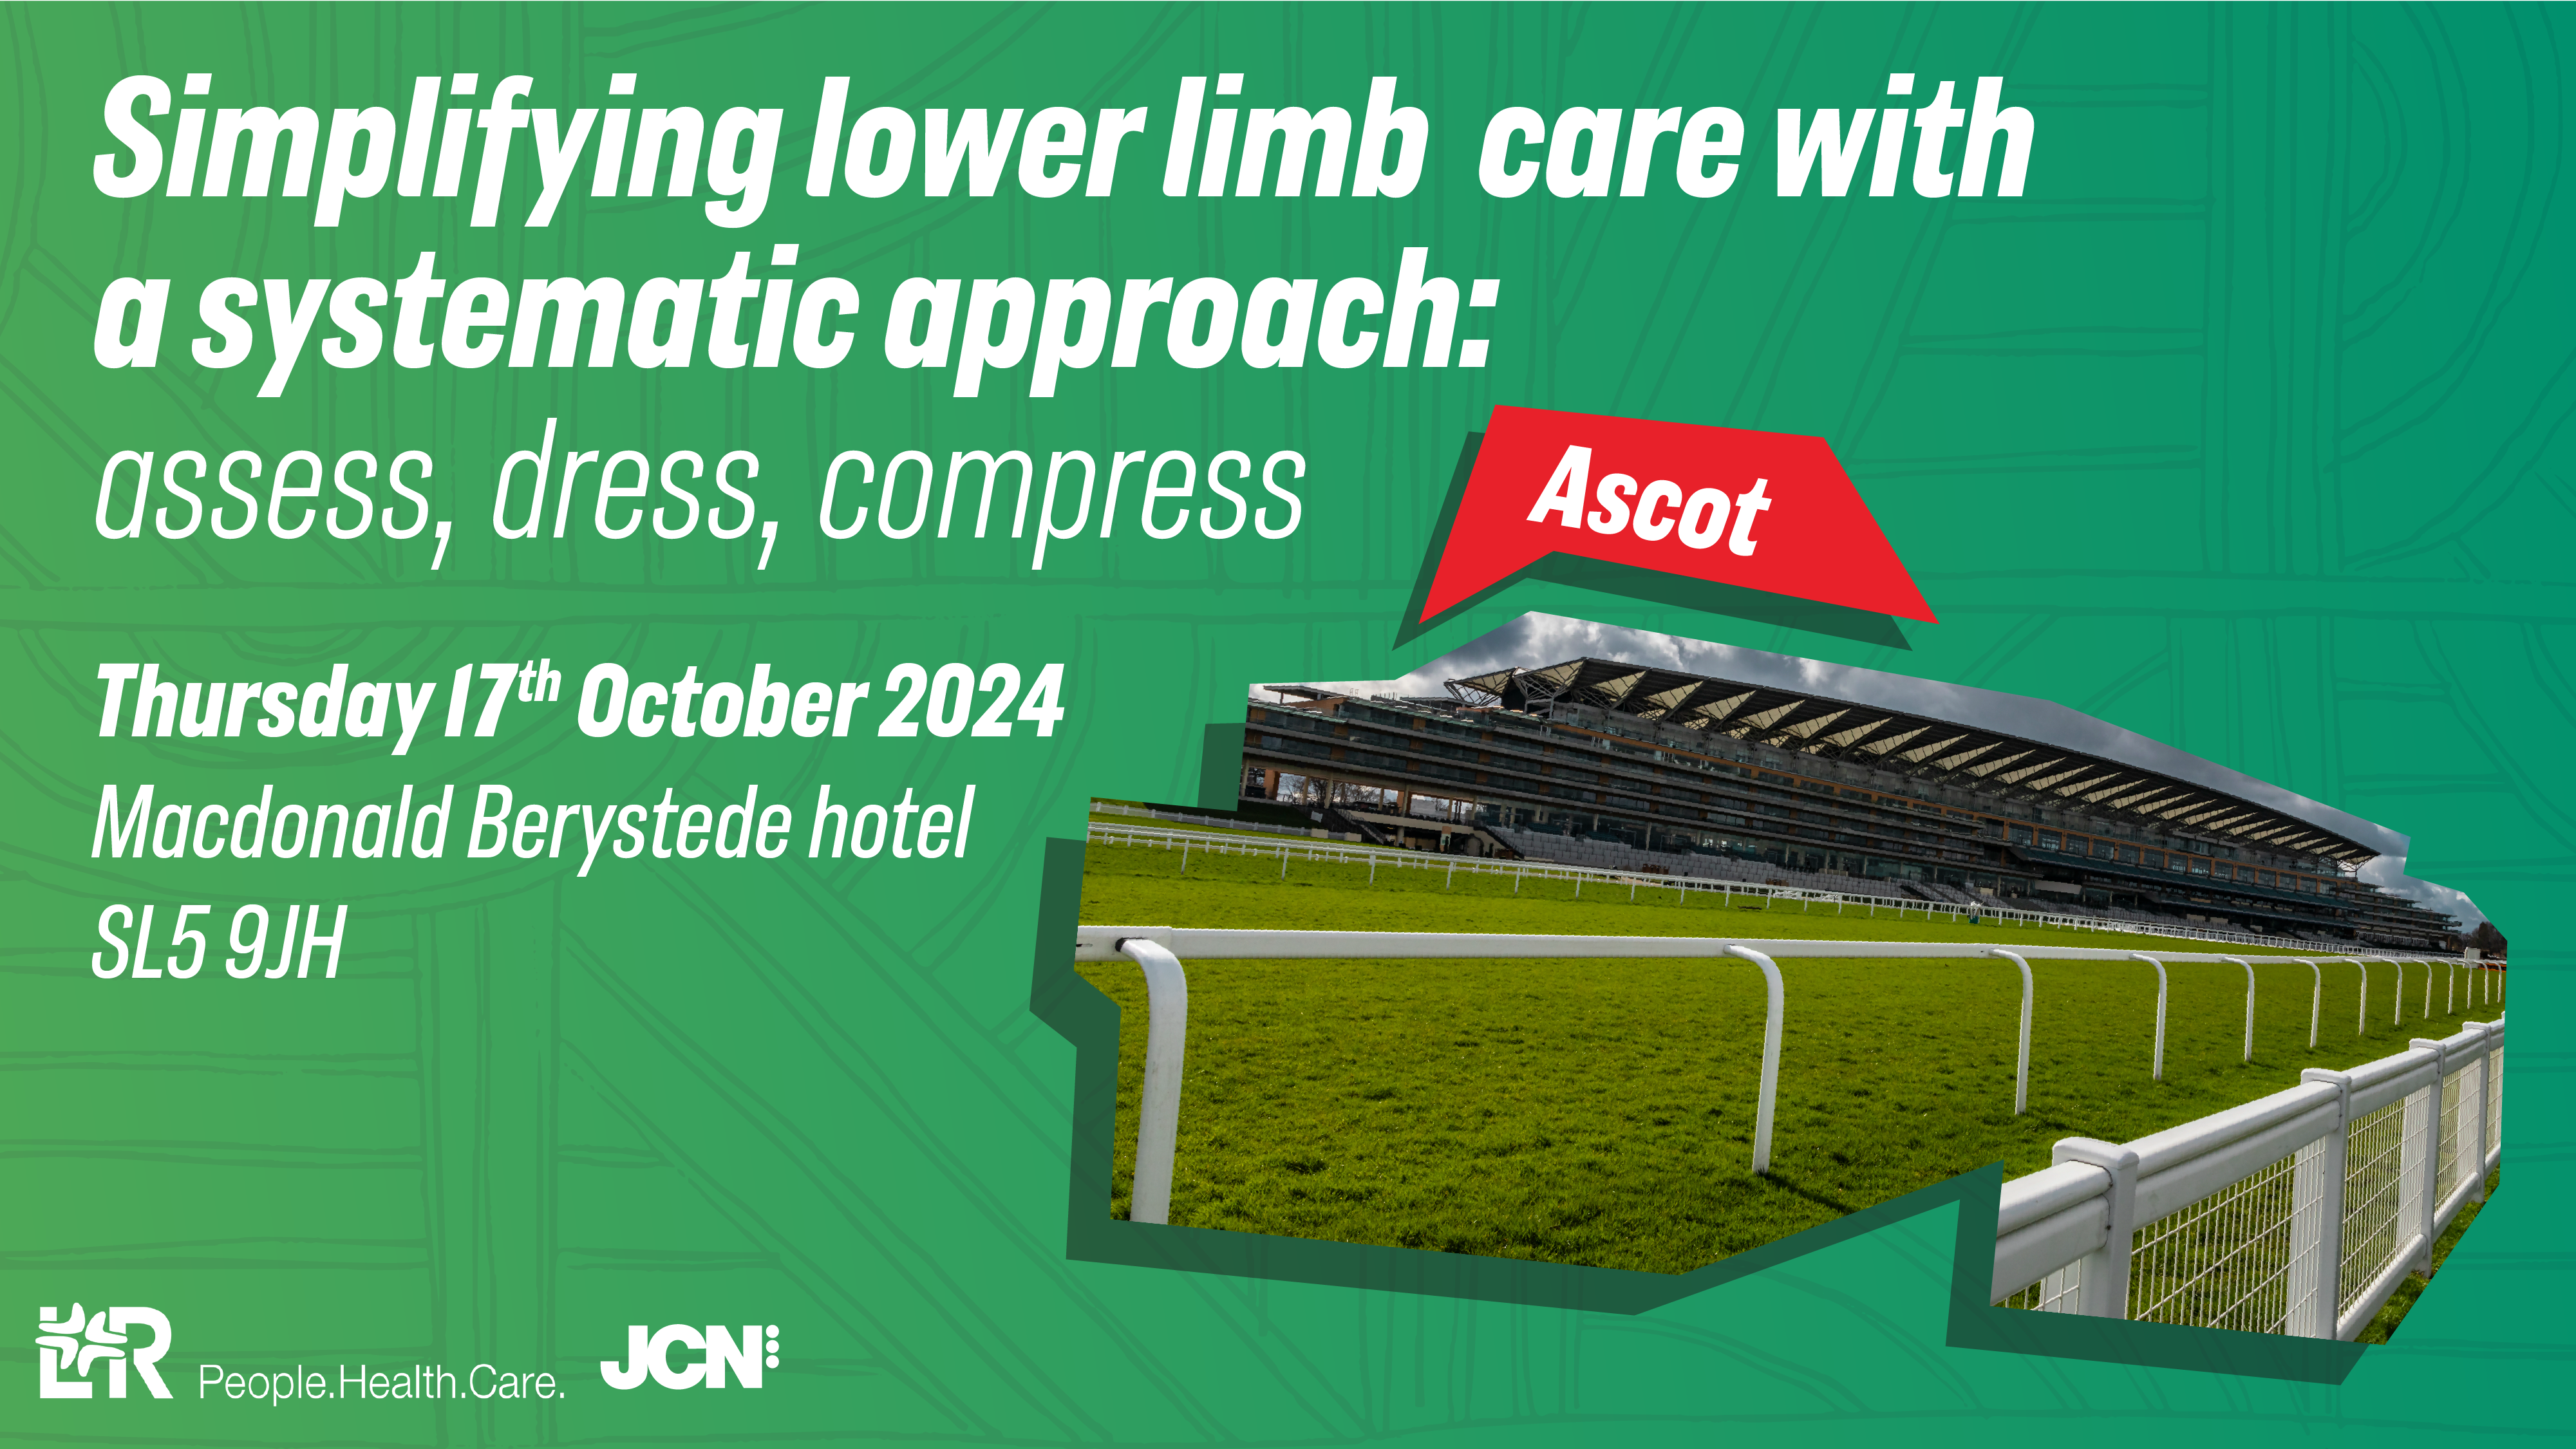 Simplifying Lower limb care with a systematic approach: assess, dress, compress - Ascot